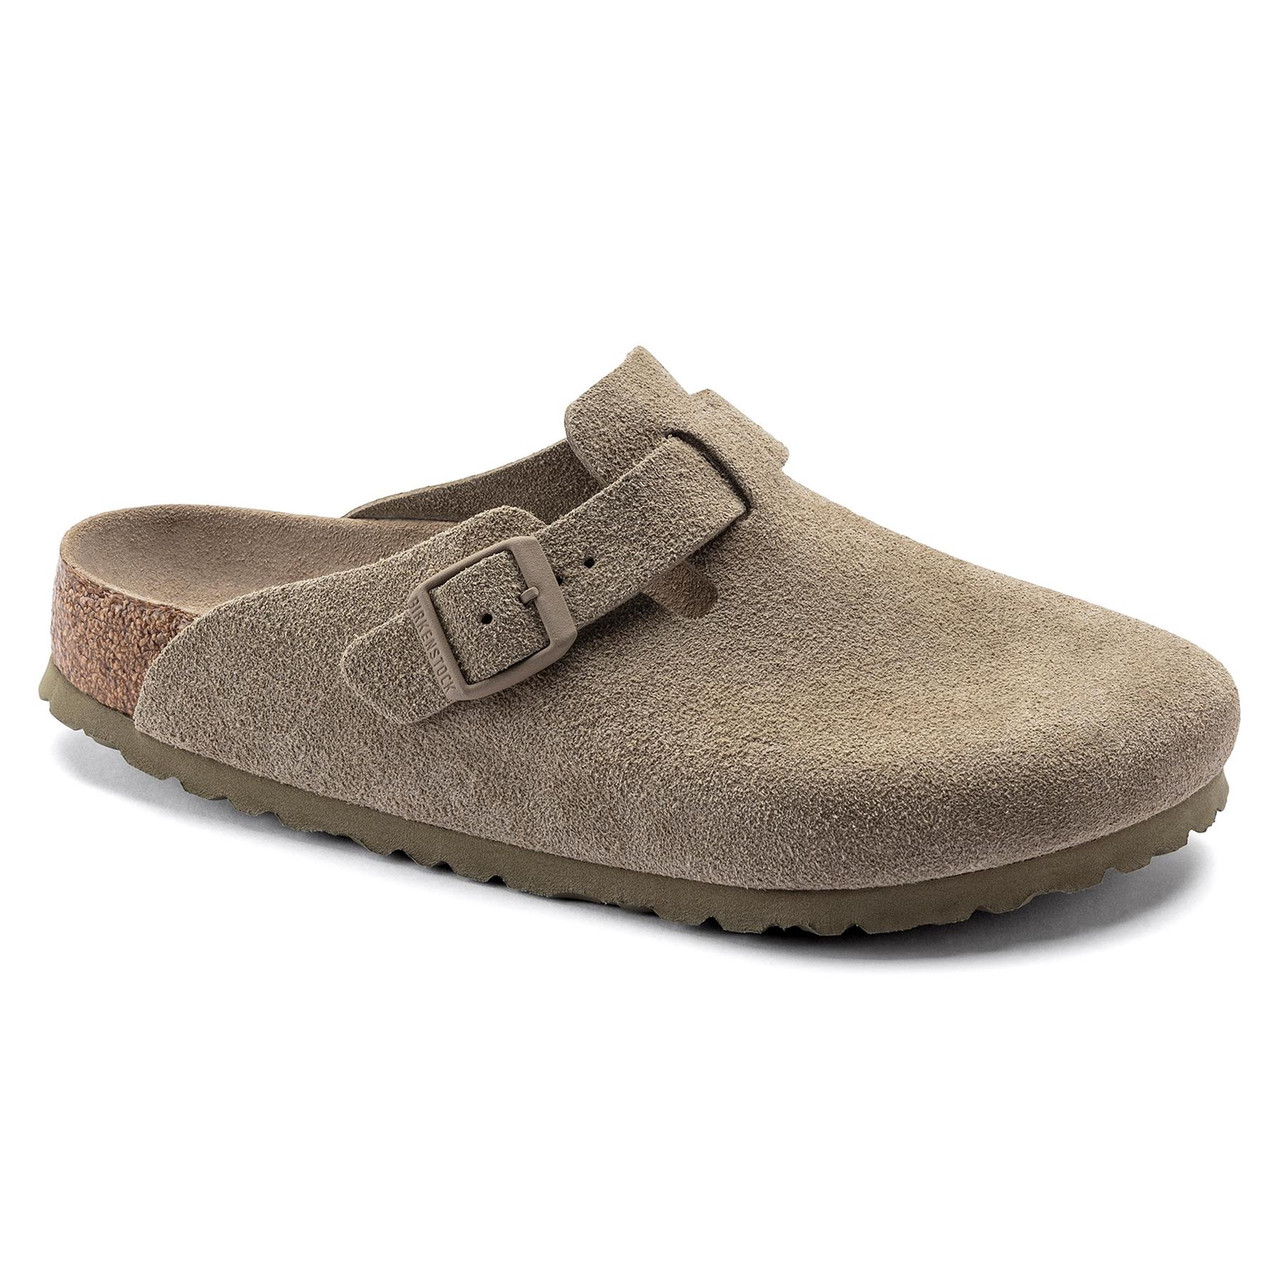 Where is the production location of the Birkenstock Boston Soft Footbed Suede Leather Clog?